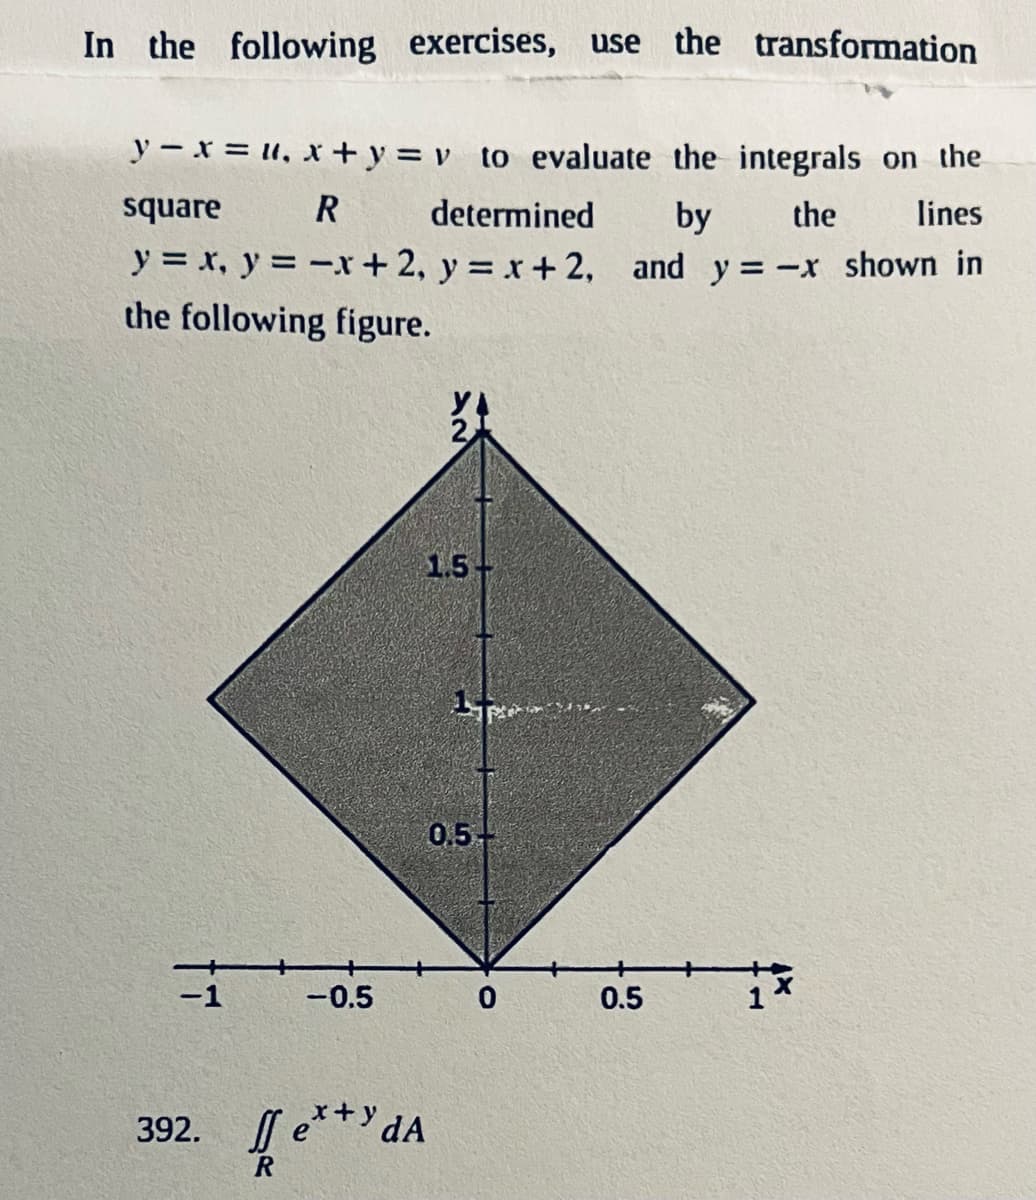 In the following exercises, use the transformation
y-x=u, x+y= v to evaluate the integrals on the
square
determined
R
by the
lines
y = x, y = -x + 2, y = x+2, and y=-x shown in
the following figure.
-1
-0.5
392. fe**dA
R
1.5+
0.5-
0
0.5
→